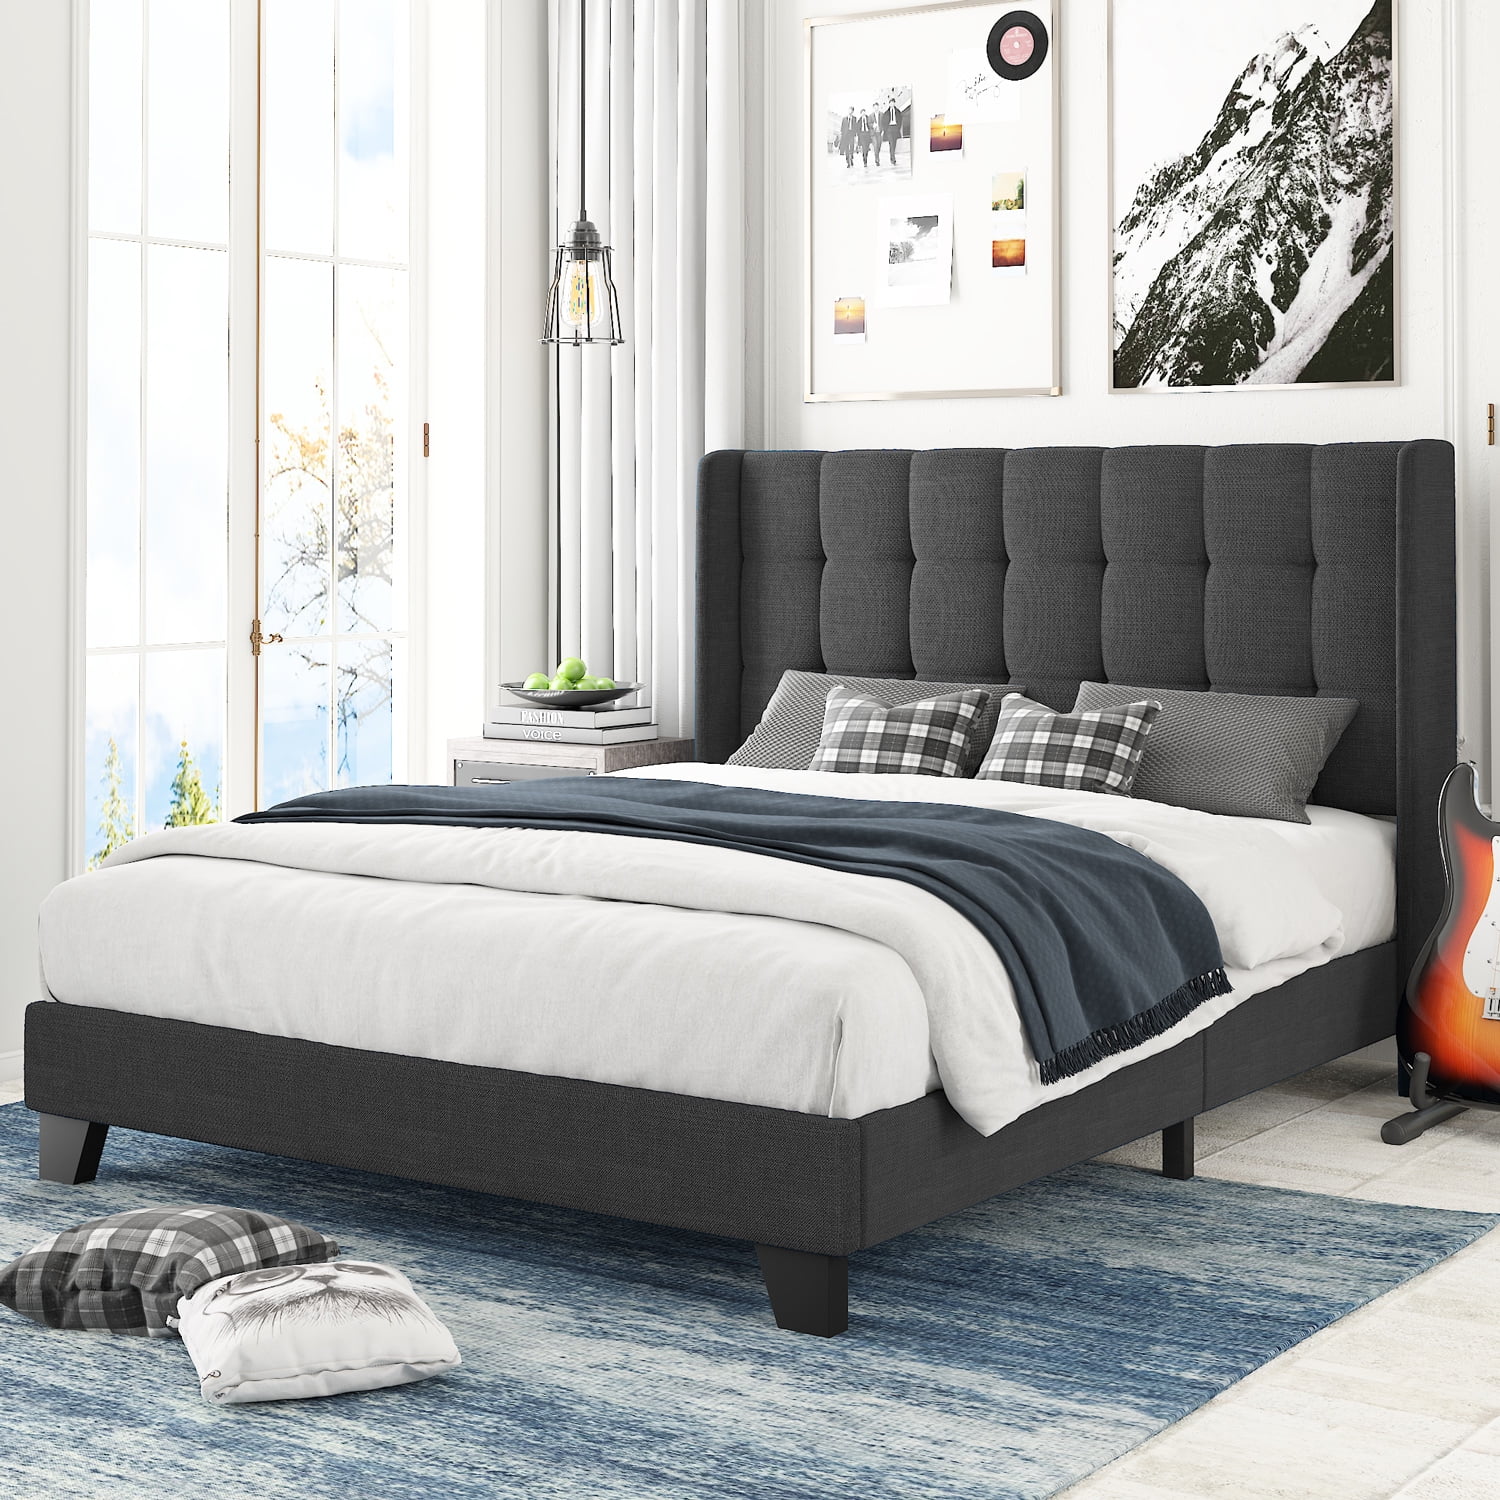 Amolife Full Upholstered Wingback Platform Bed Frame with Wood Slat Support and Square Stitched Headboard, Dark Grey